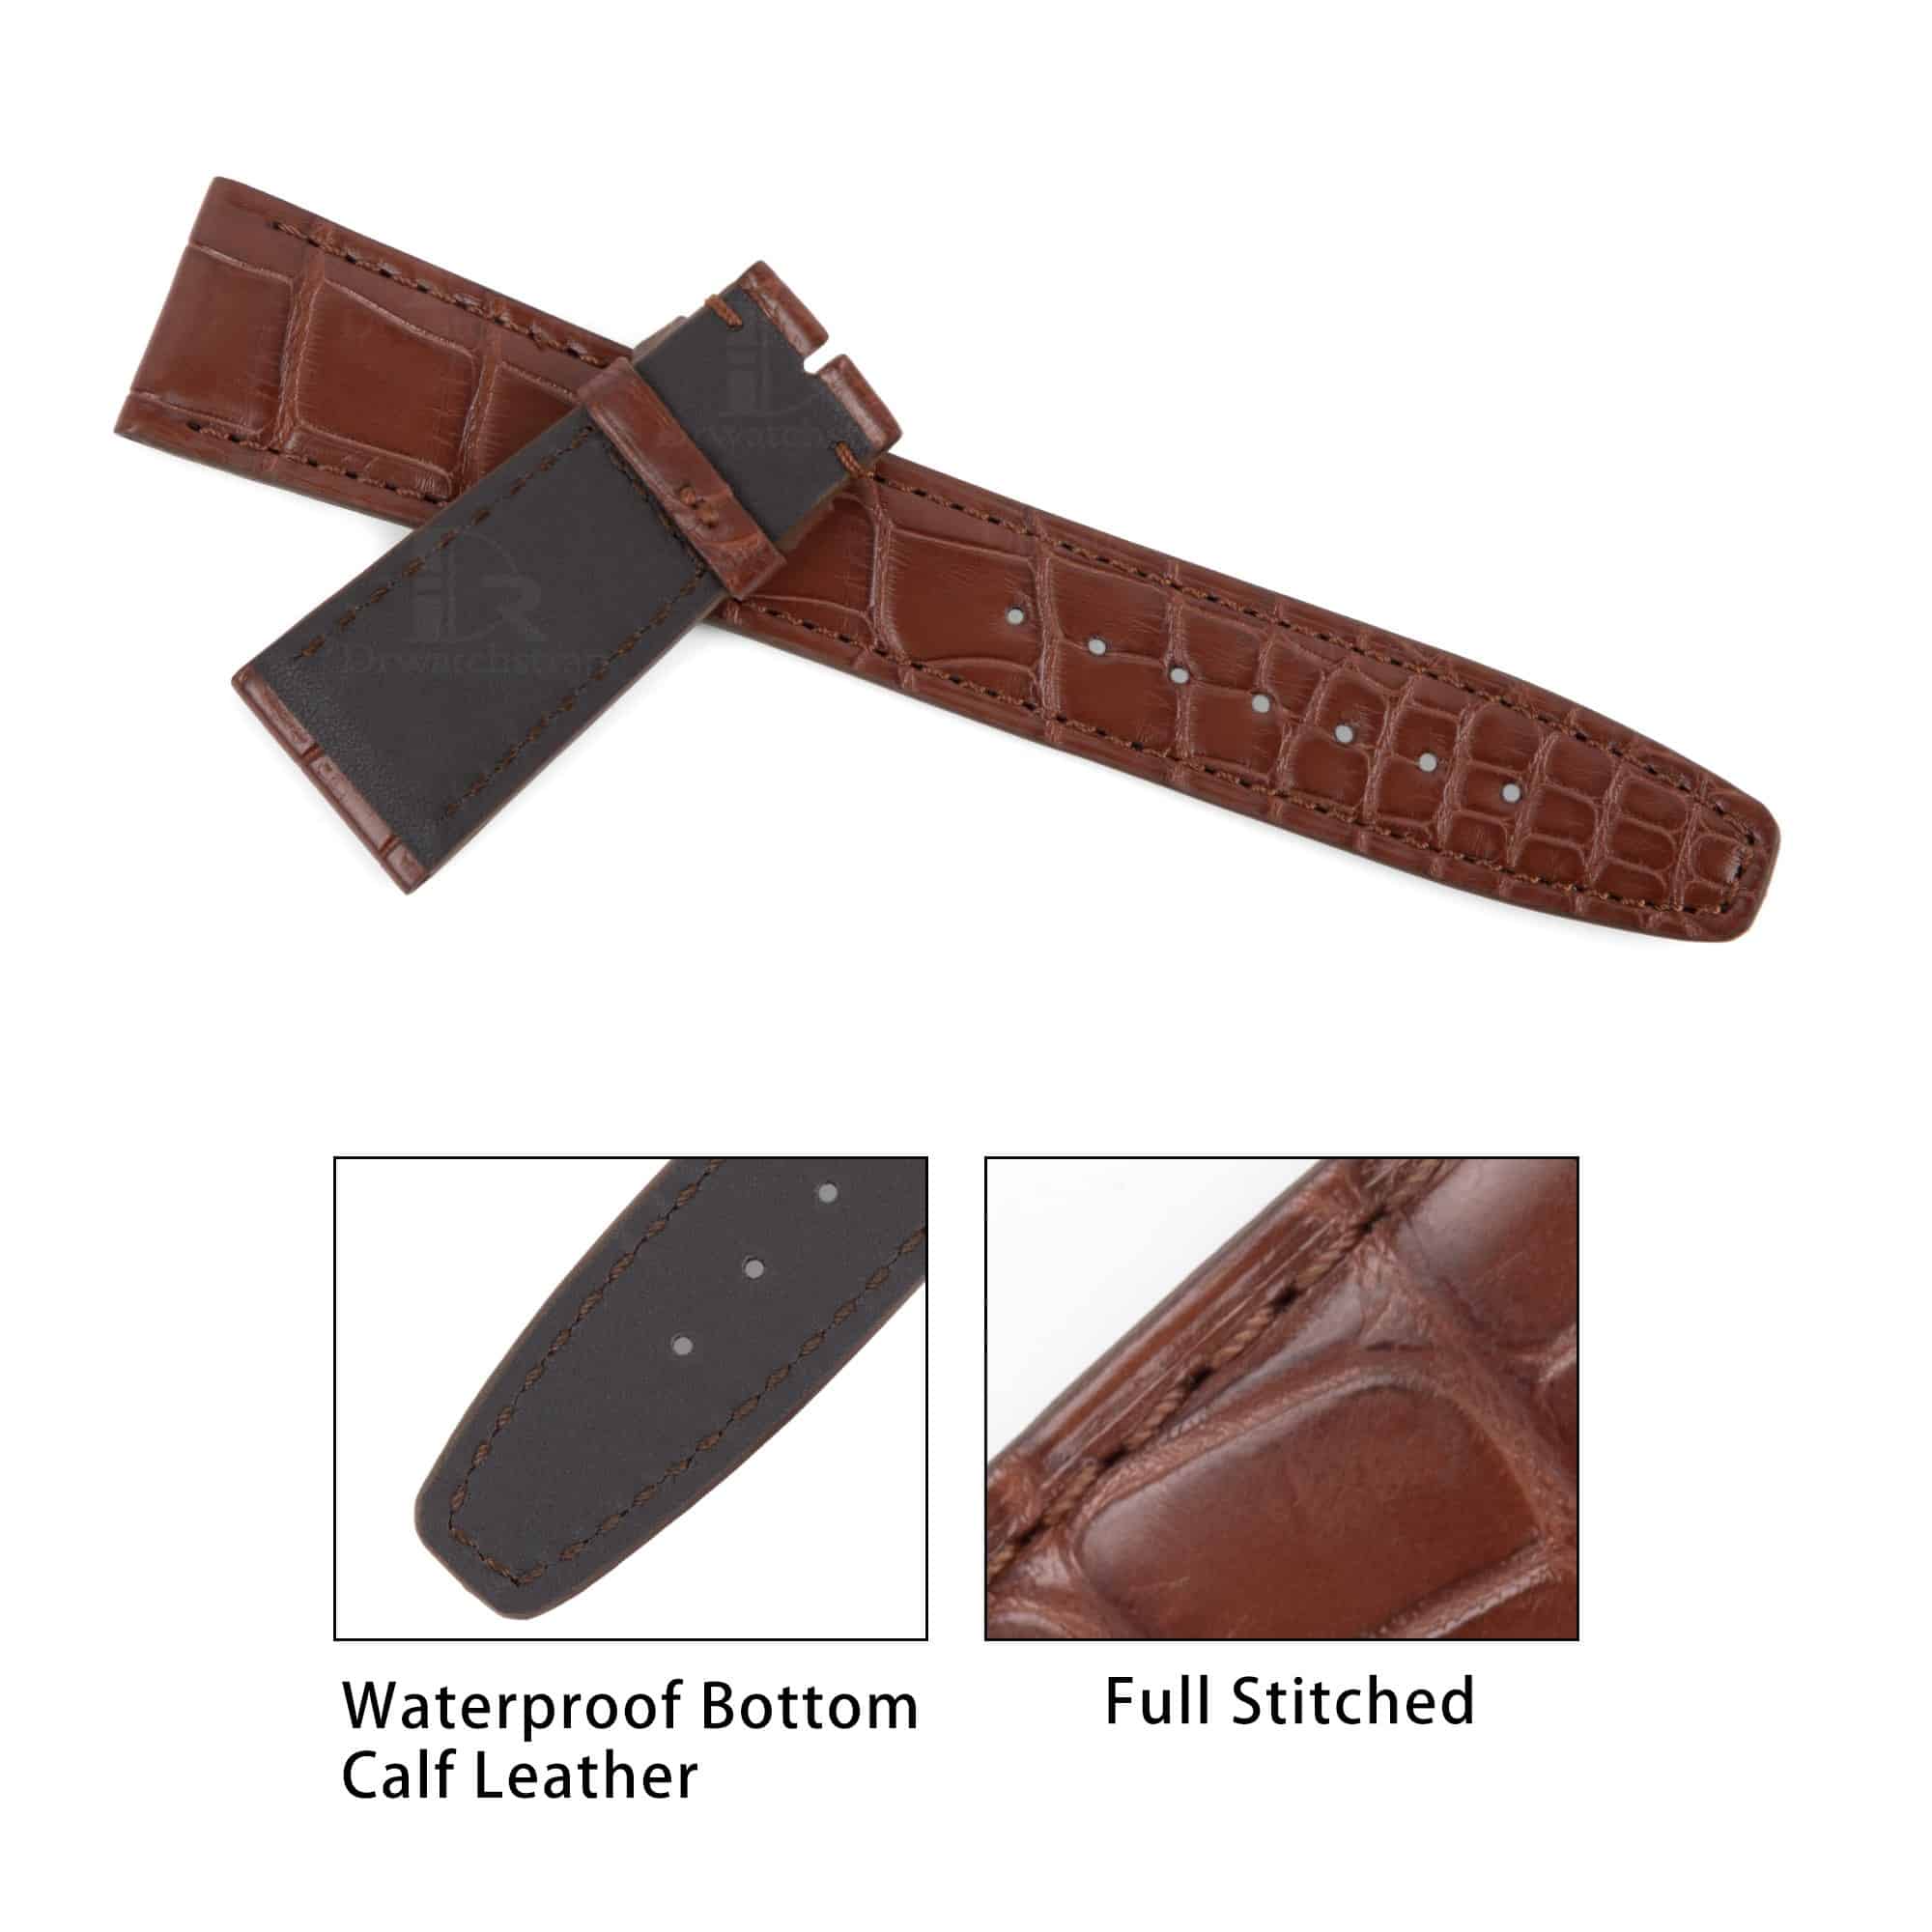 Wholesale and Retail custom handmade IWC watch bands & replacement straps for luxury watches. handcrafted IWC aftermarket straps